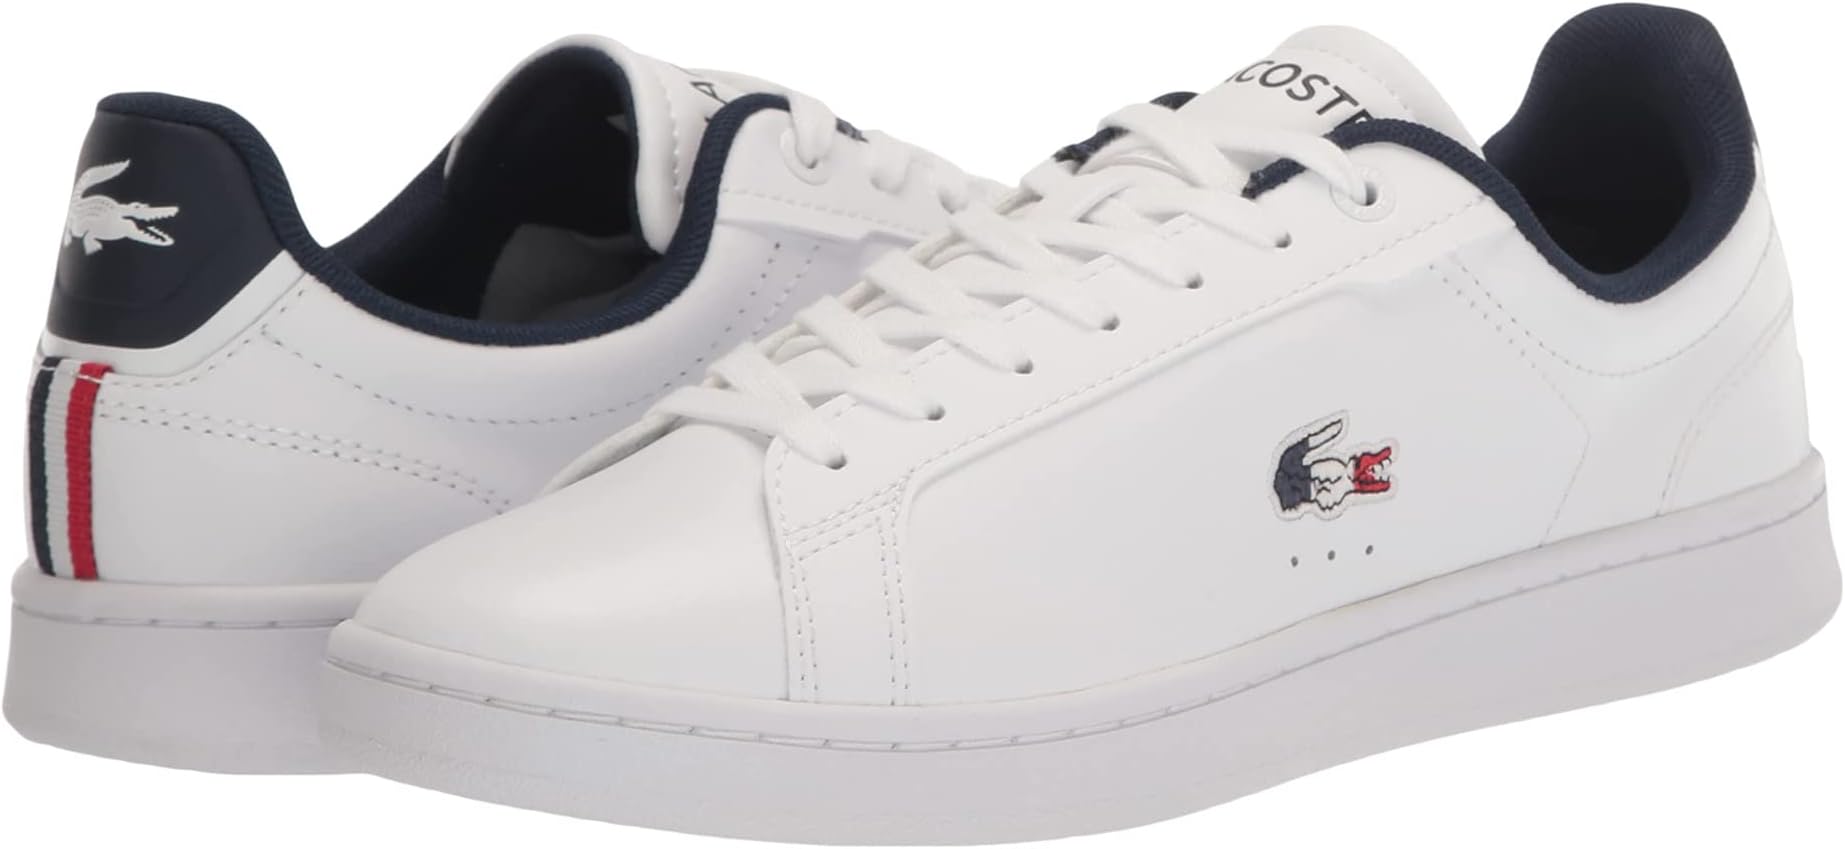 Кроссовки Carnaby Pro Tri 123 1 Lacoste, цвет White/Navy/Red кроссовки lacoste run spin white navy red